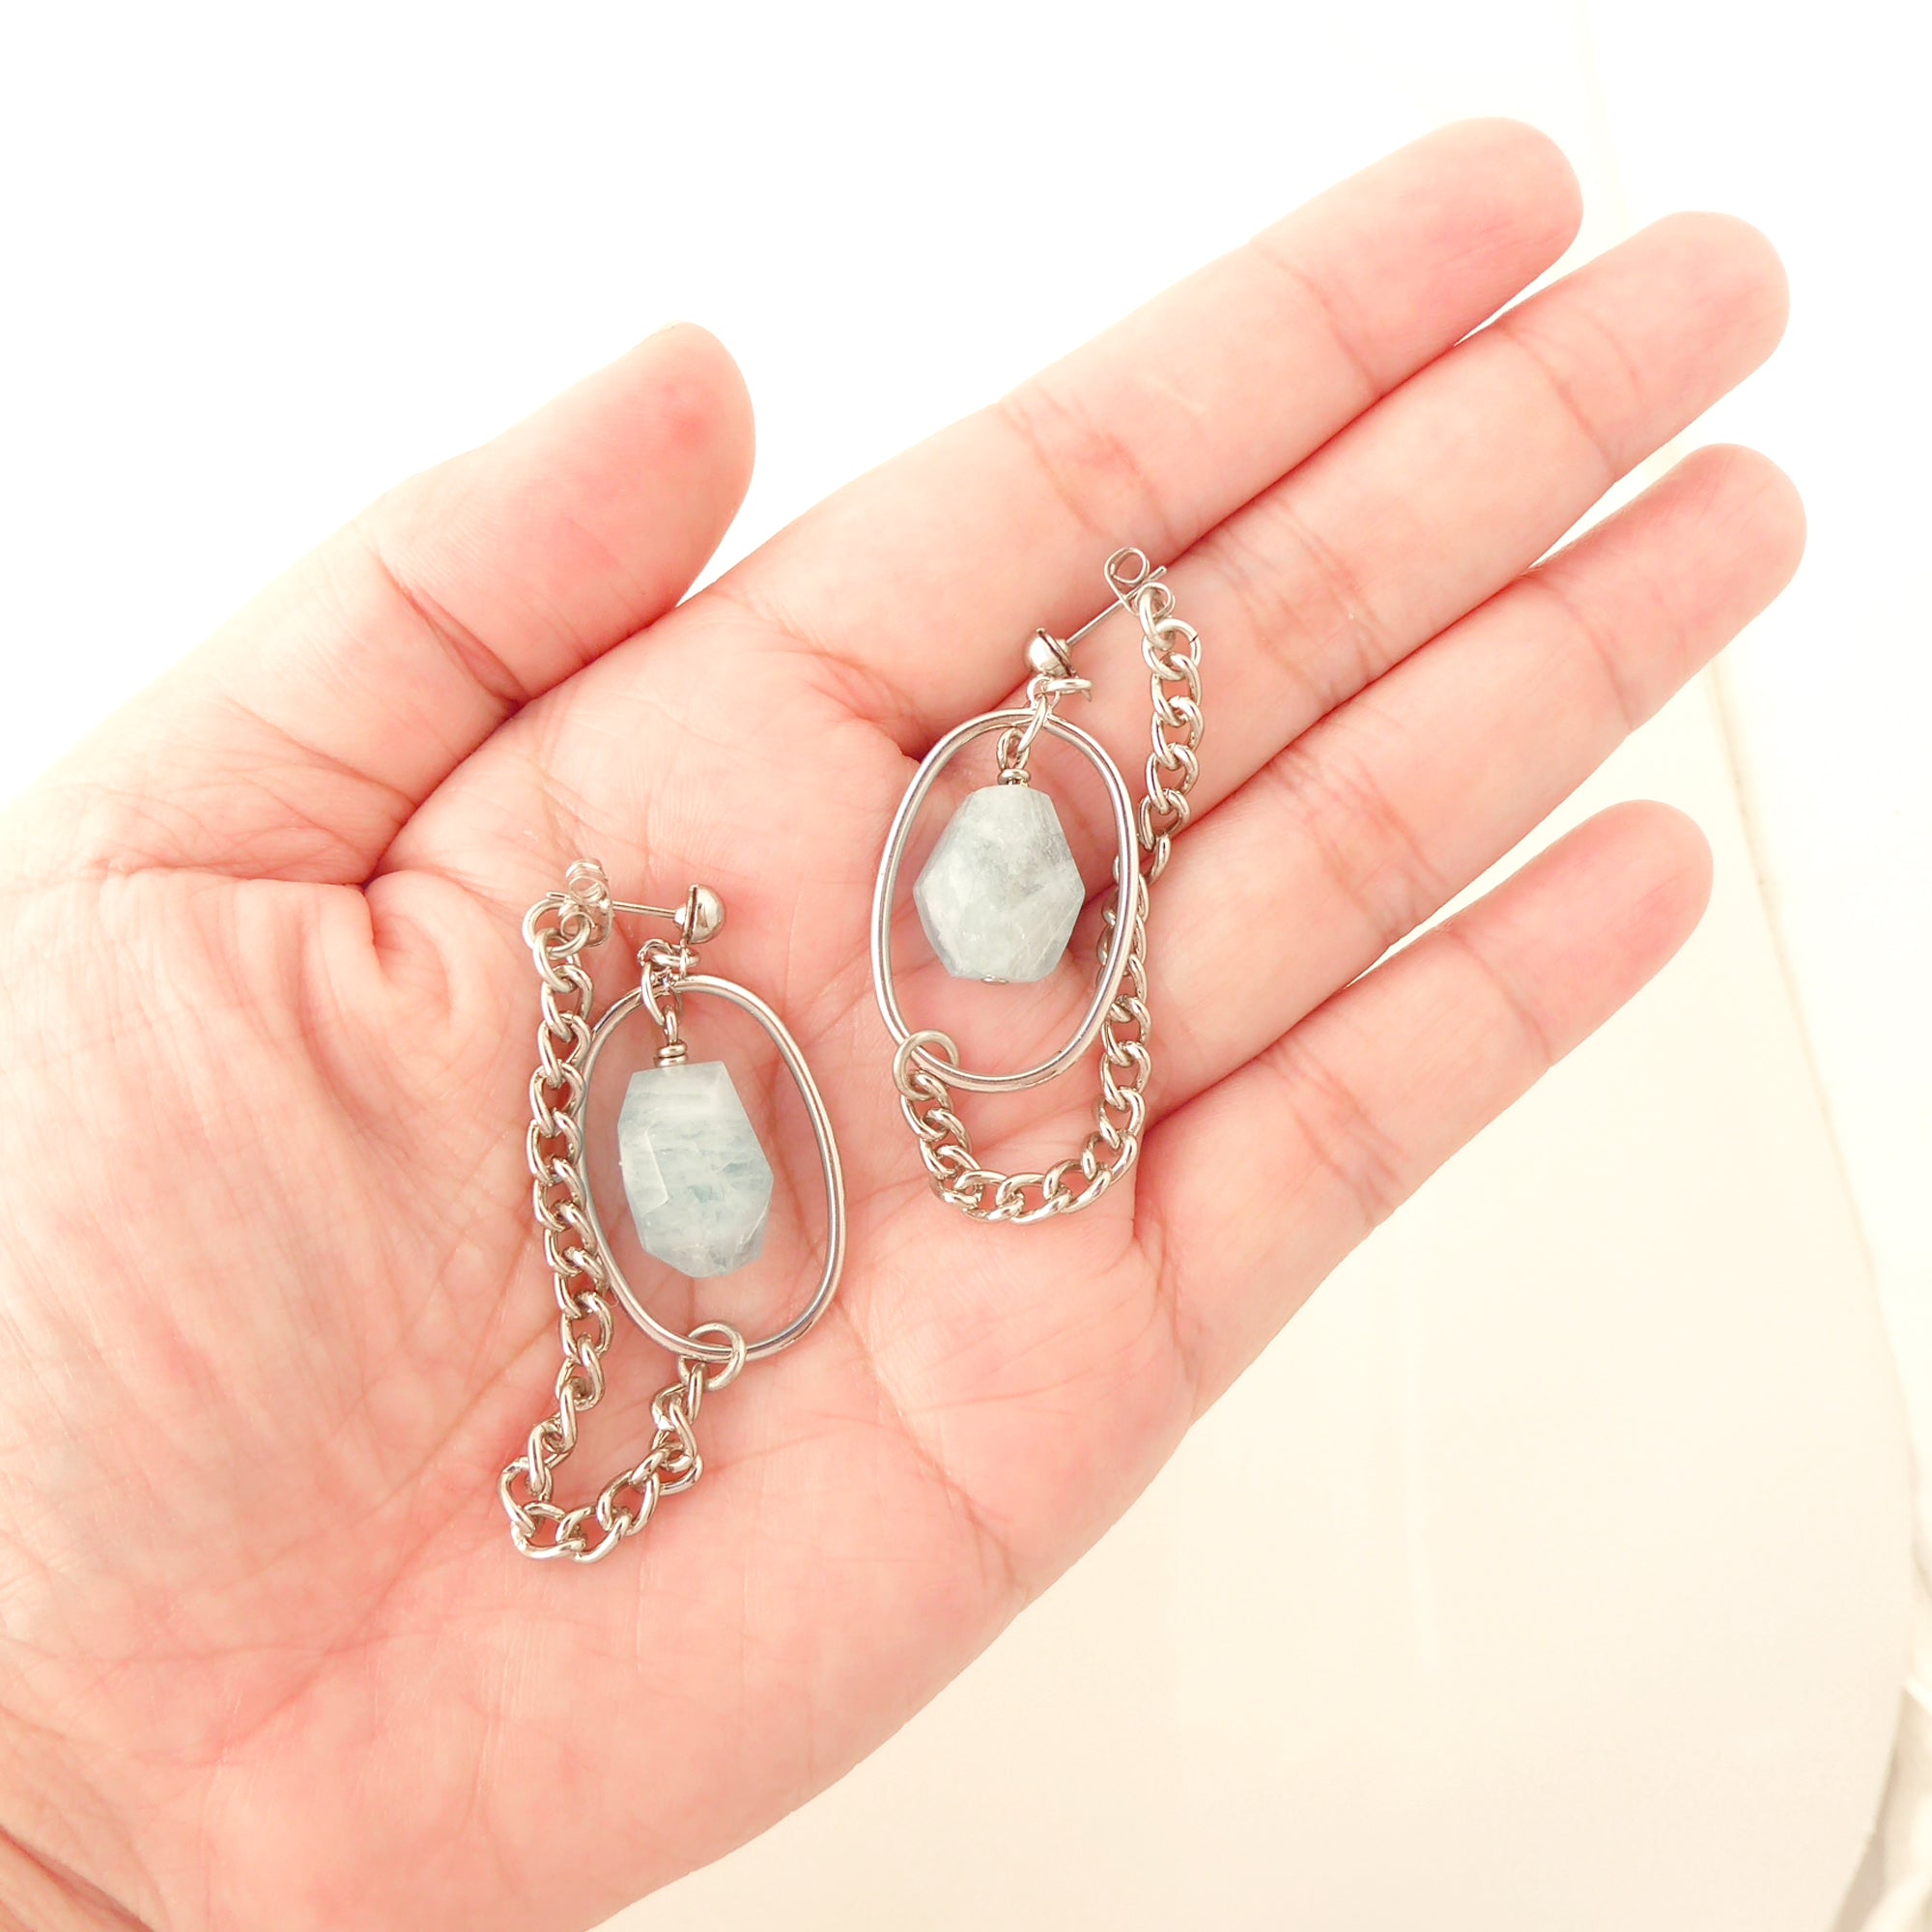 Silver saturn earrings in aquamarine by Jenny Dayco 5